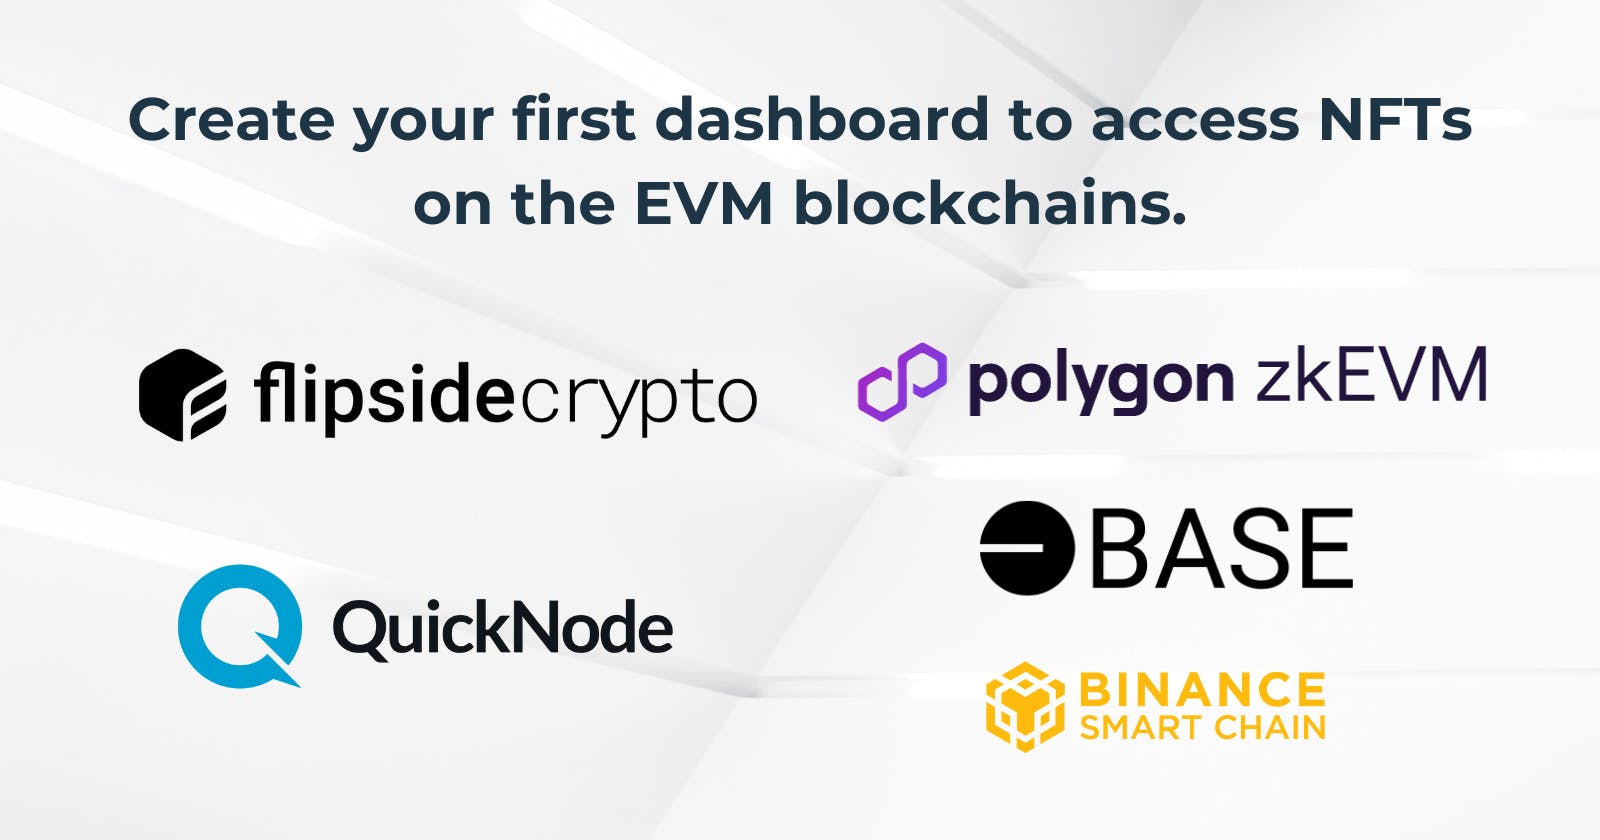 Create your first dashboard to access NFTs on the EVM blockchains